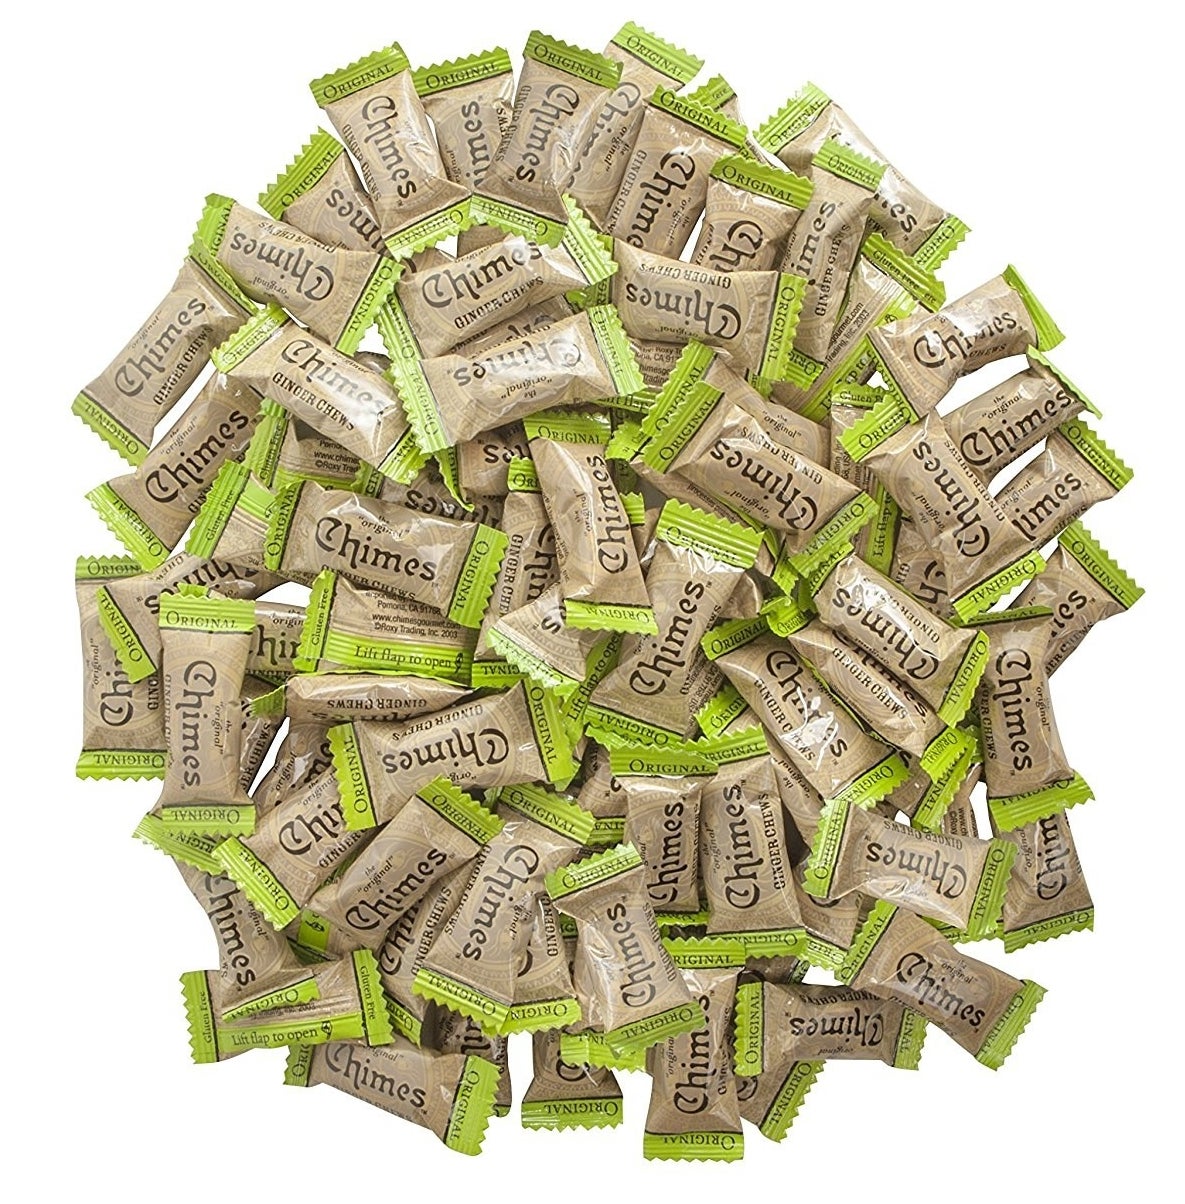 assorted ginger chews in their wrappers